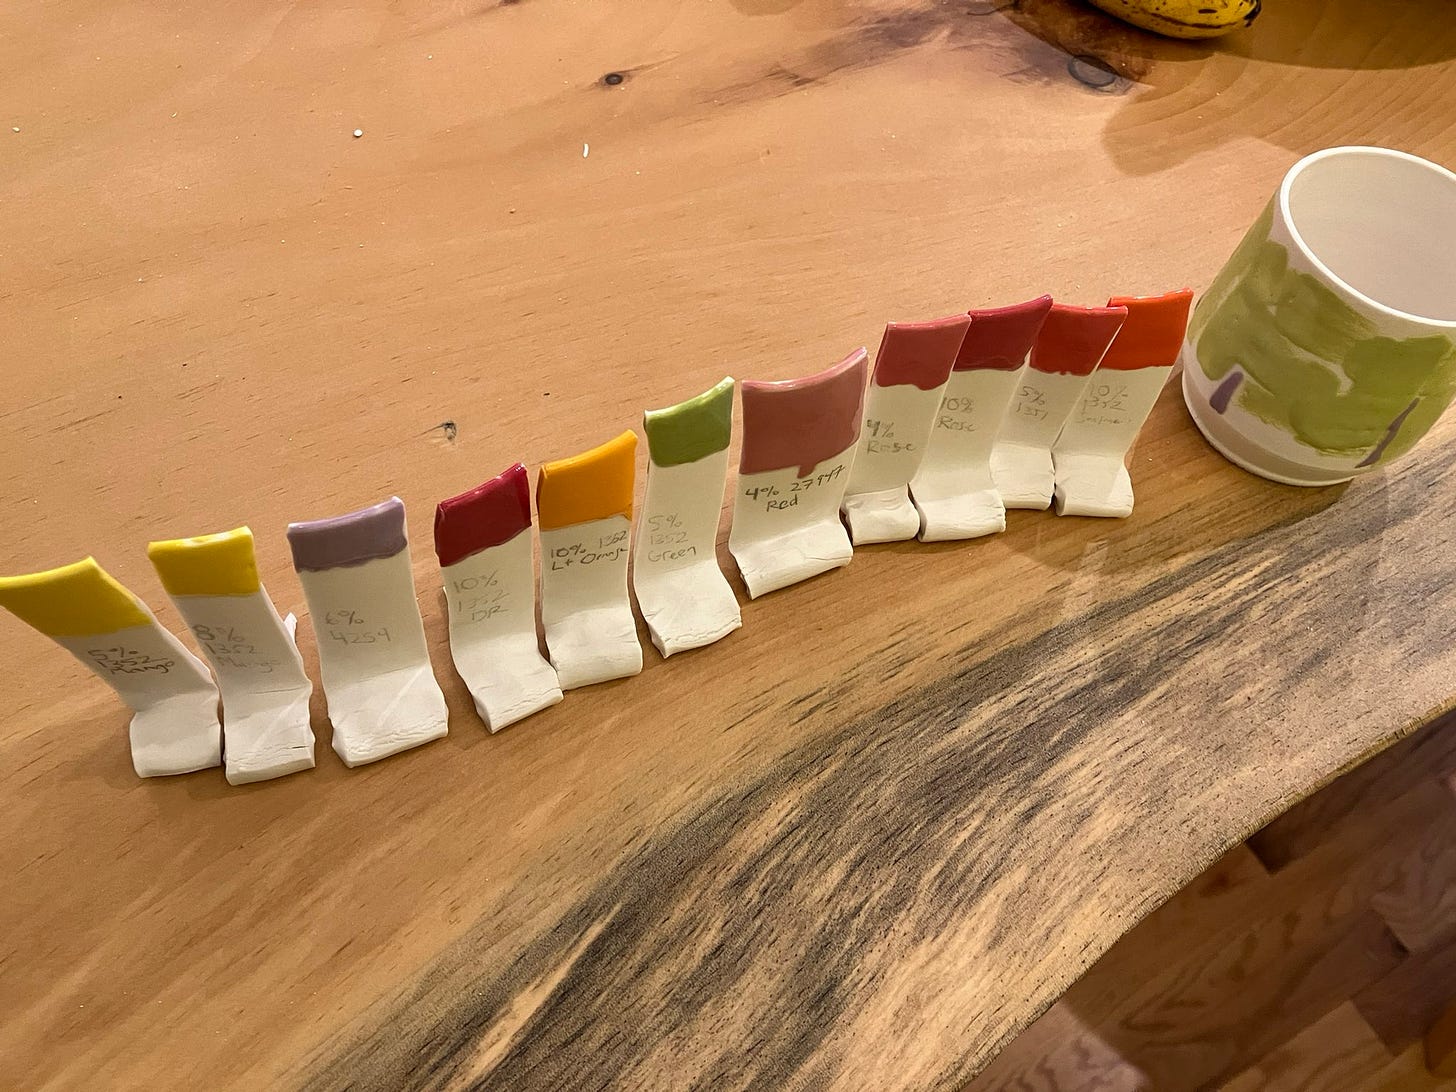 a rainbow of test tiles on a wood table, including reds, orange, yellow, green, and lavender